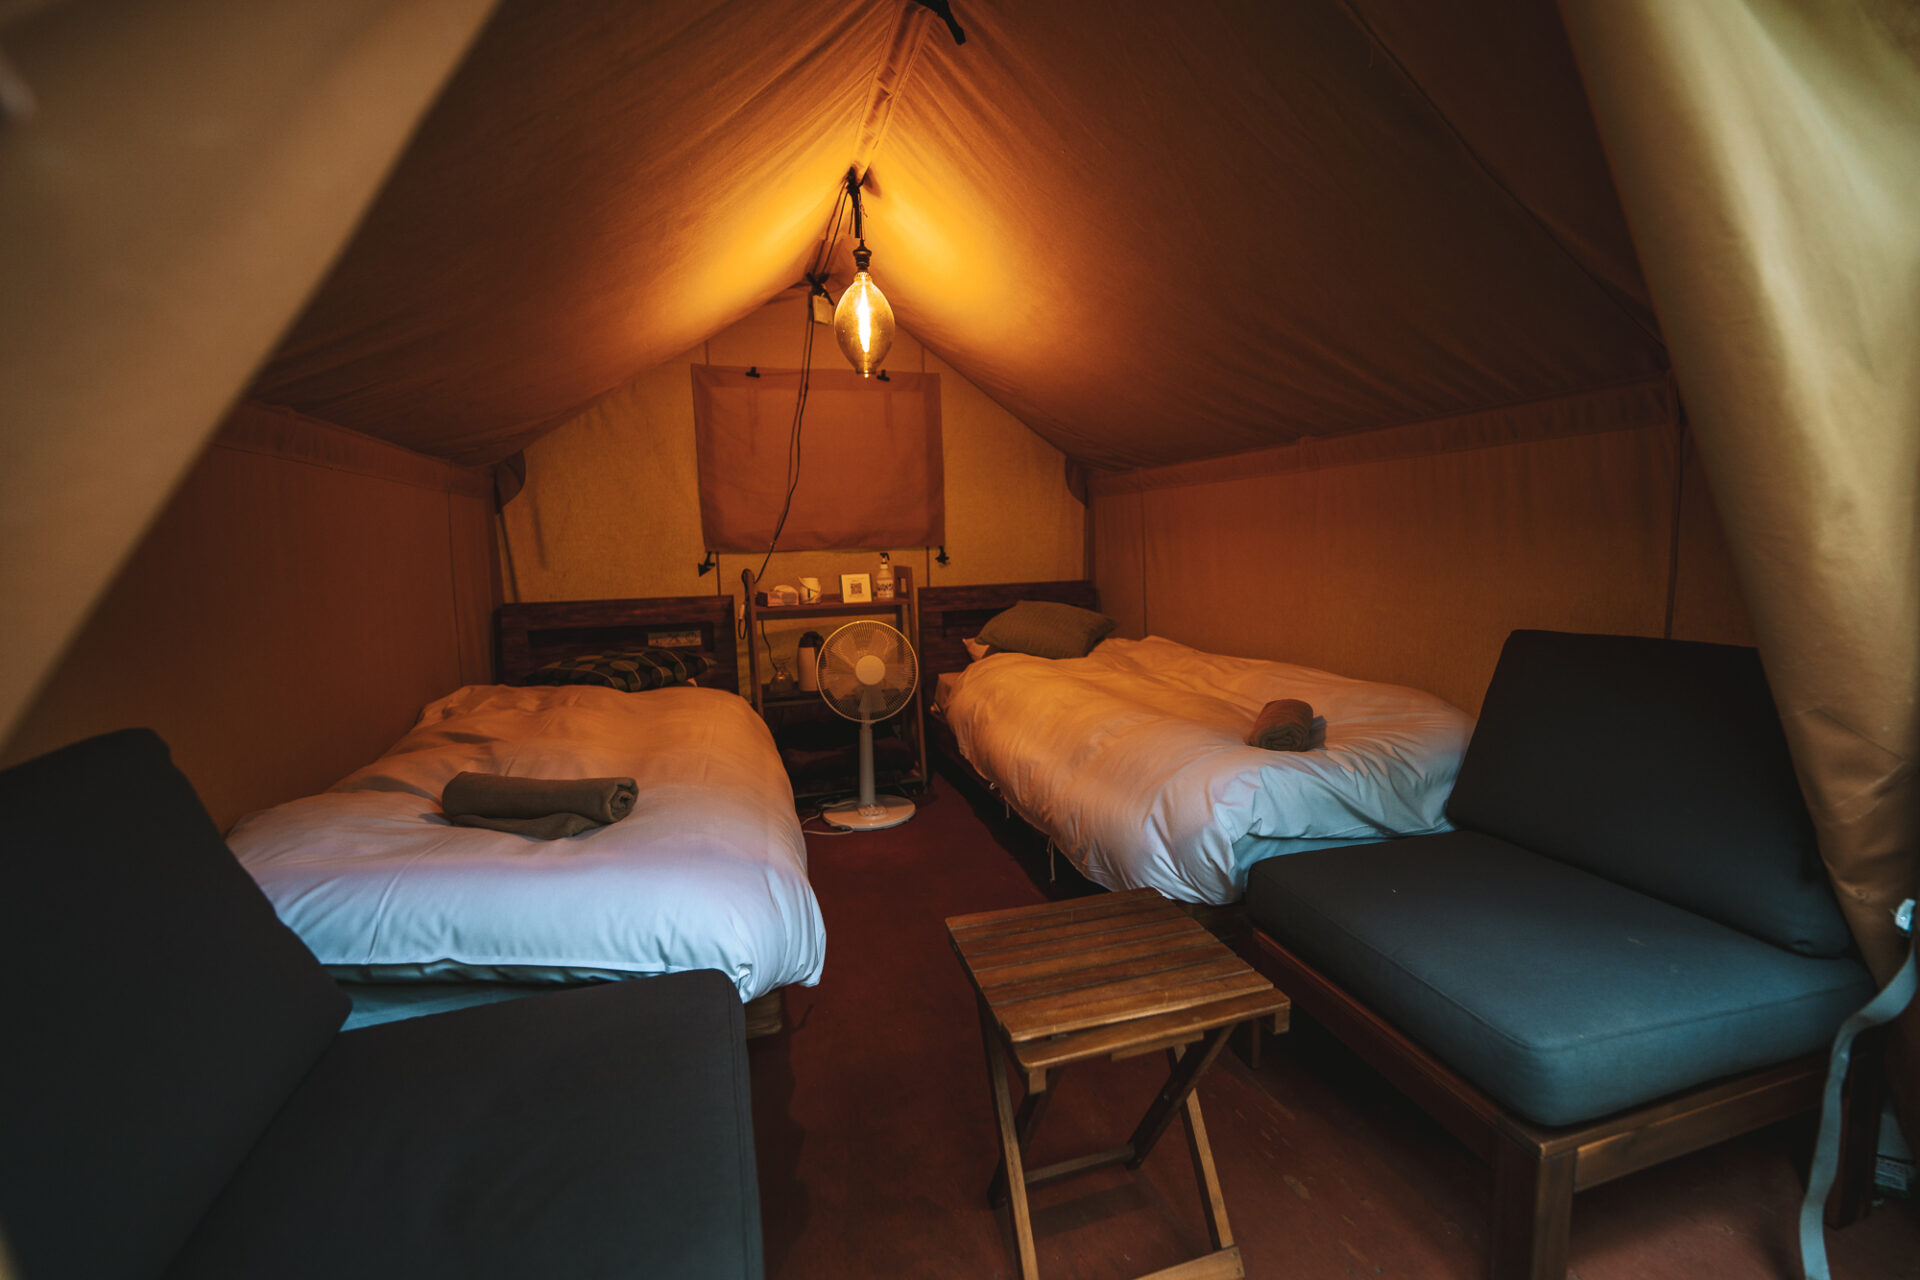 Inside the tents at Canyons